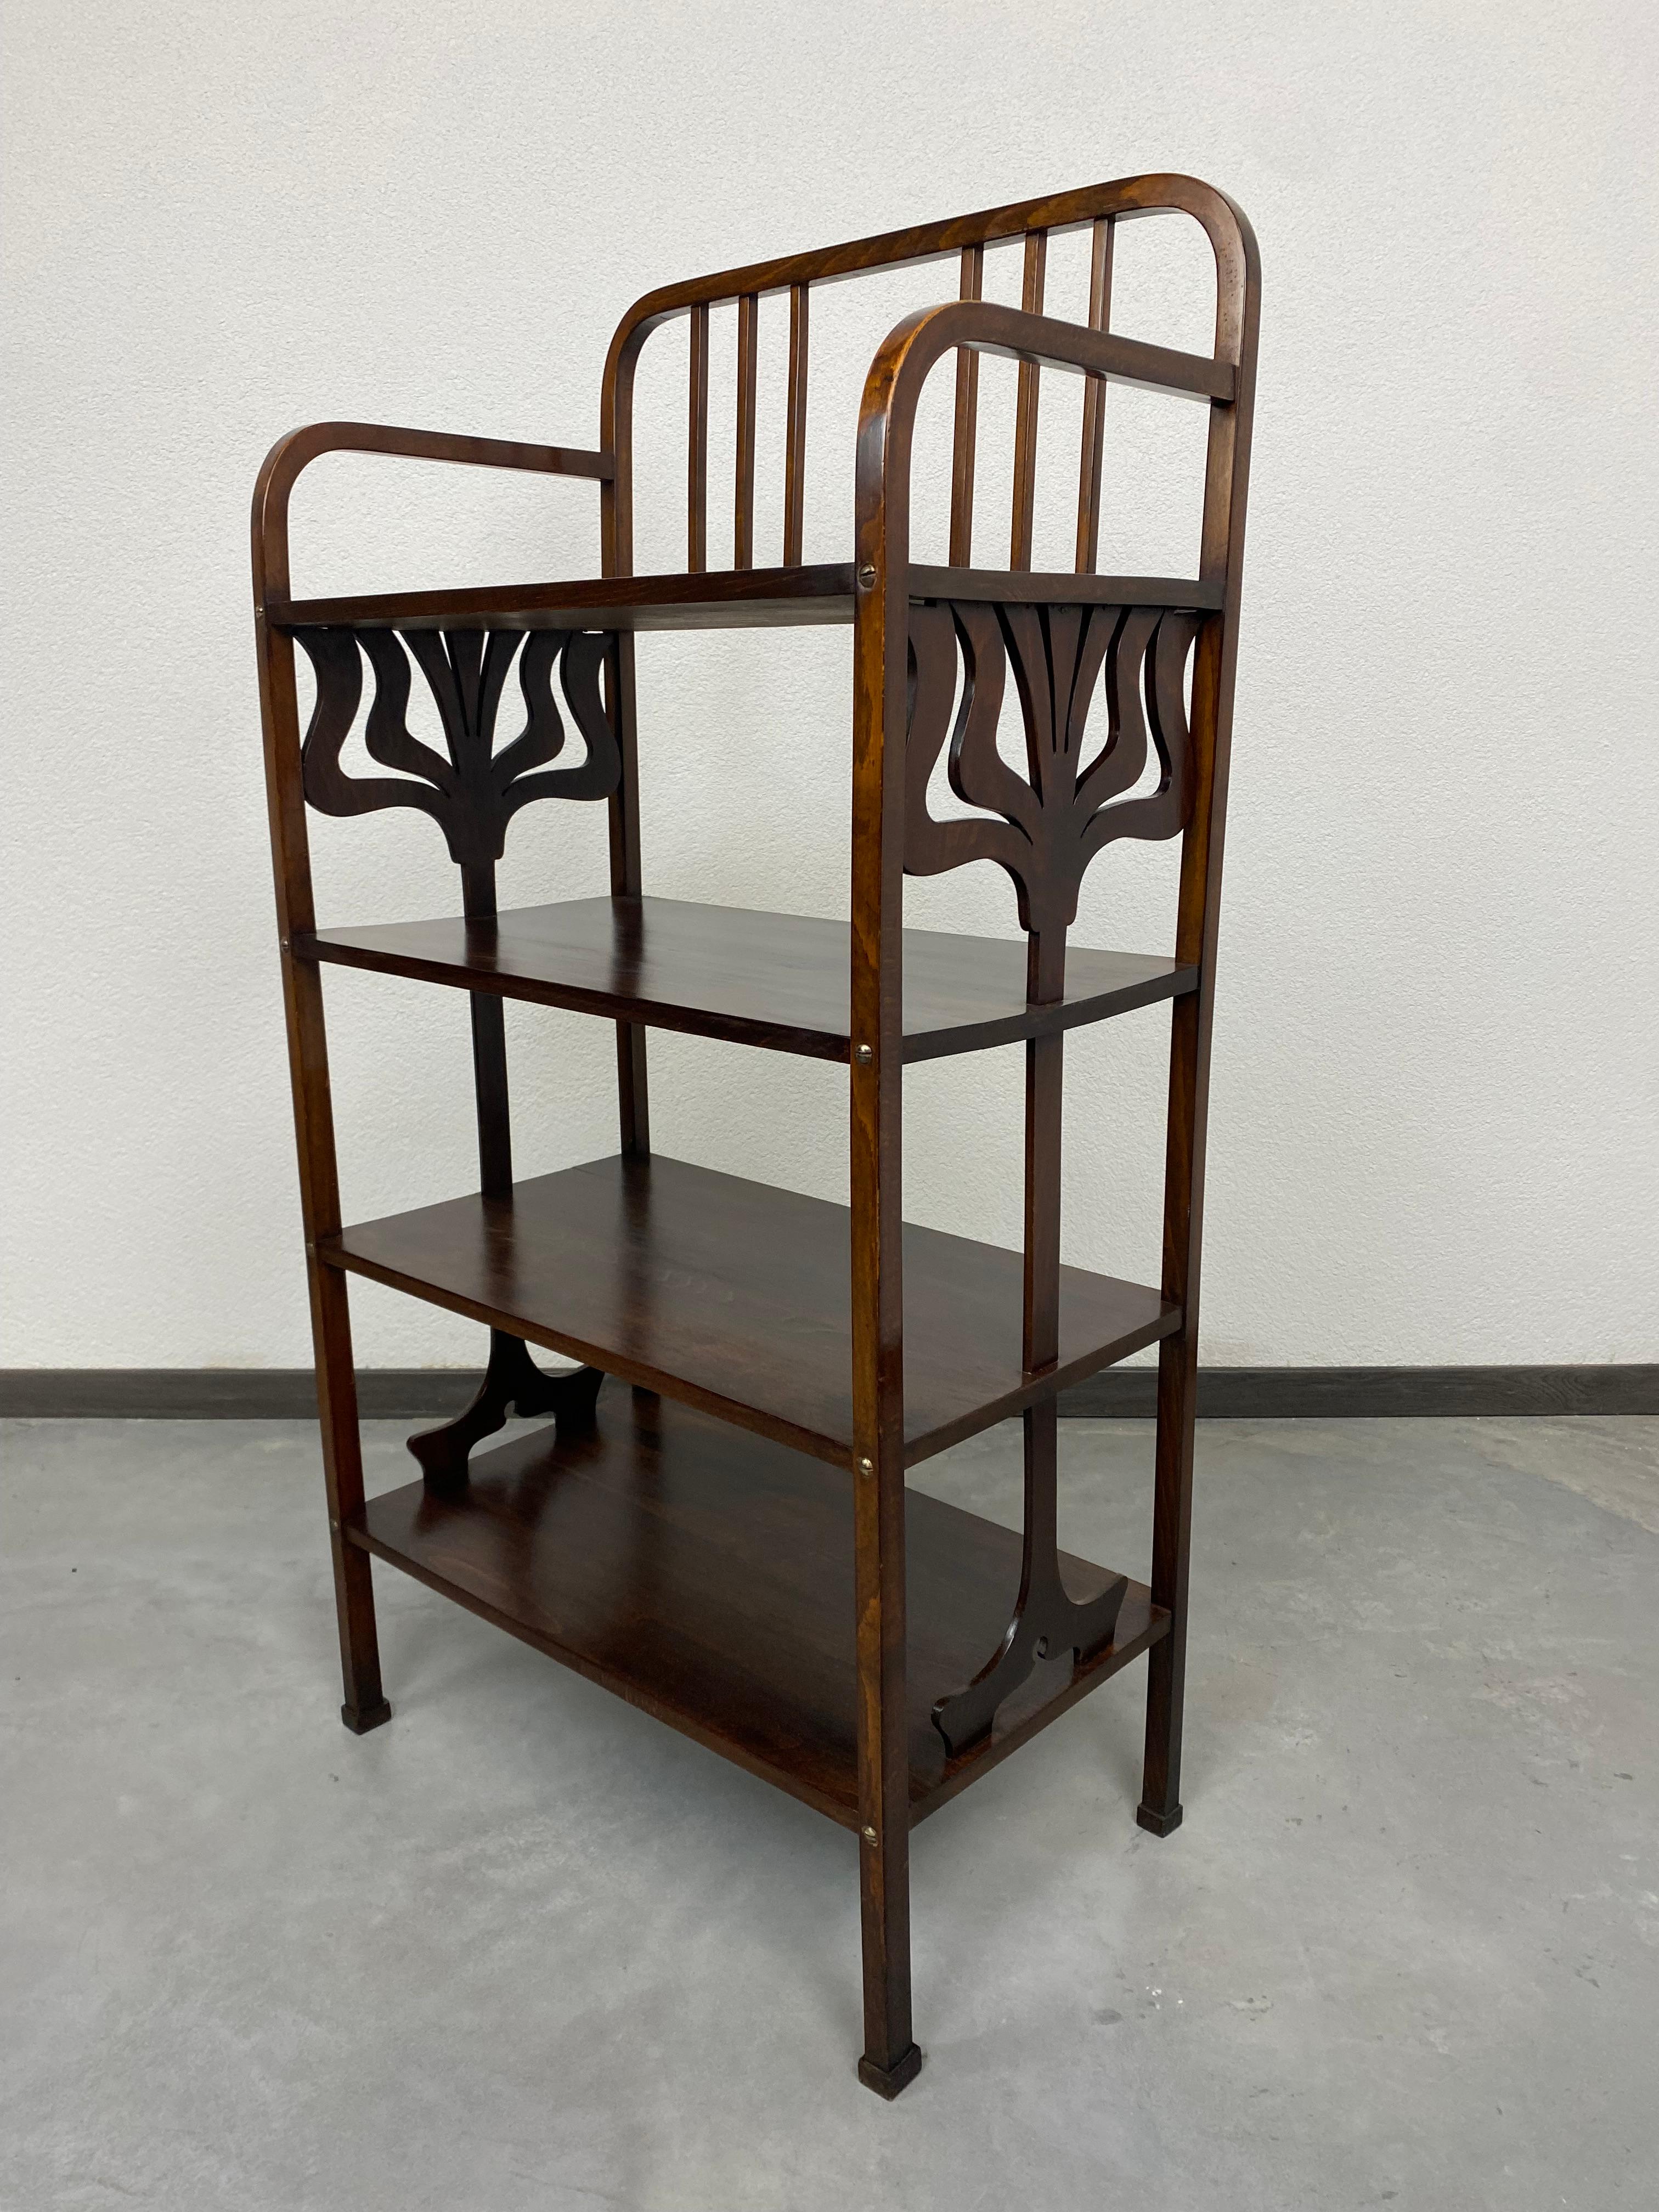 Secession etagere no.41 by Thonet. First shown in Thonet catalog from 1906.